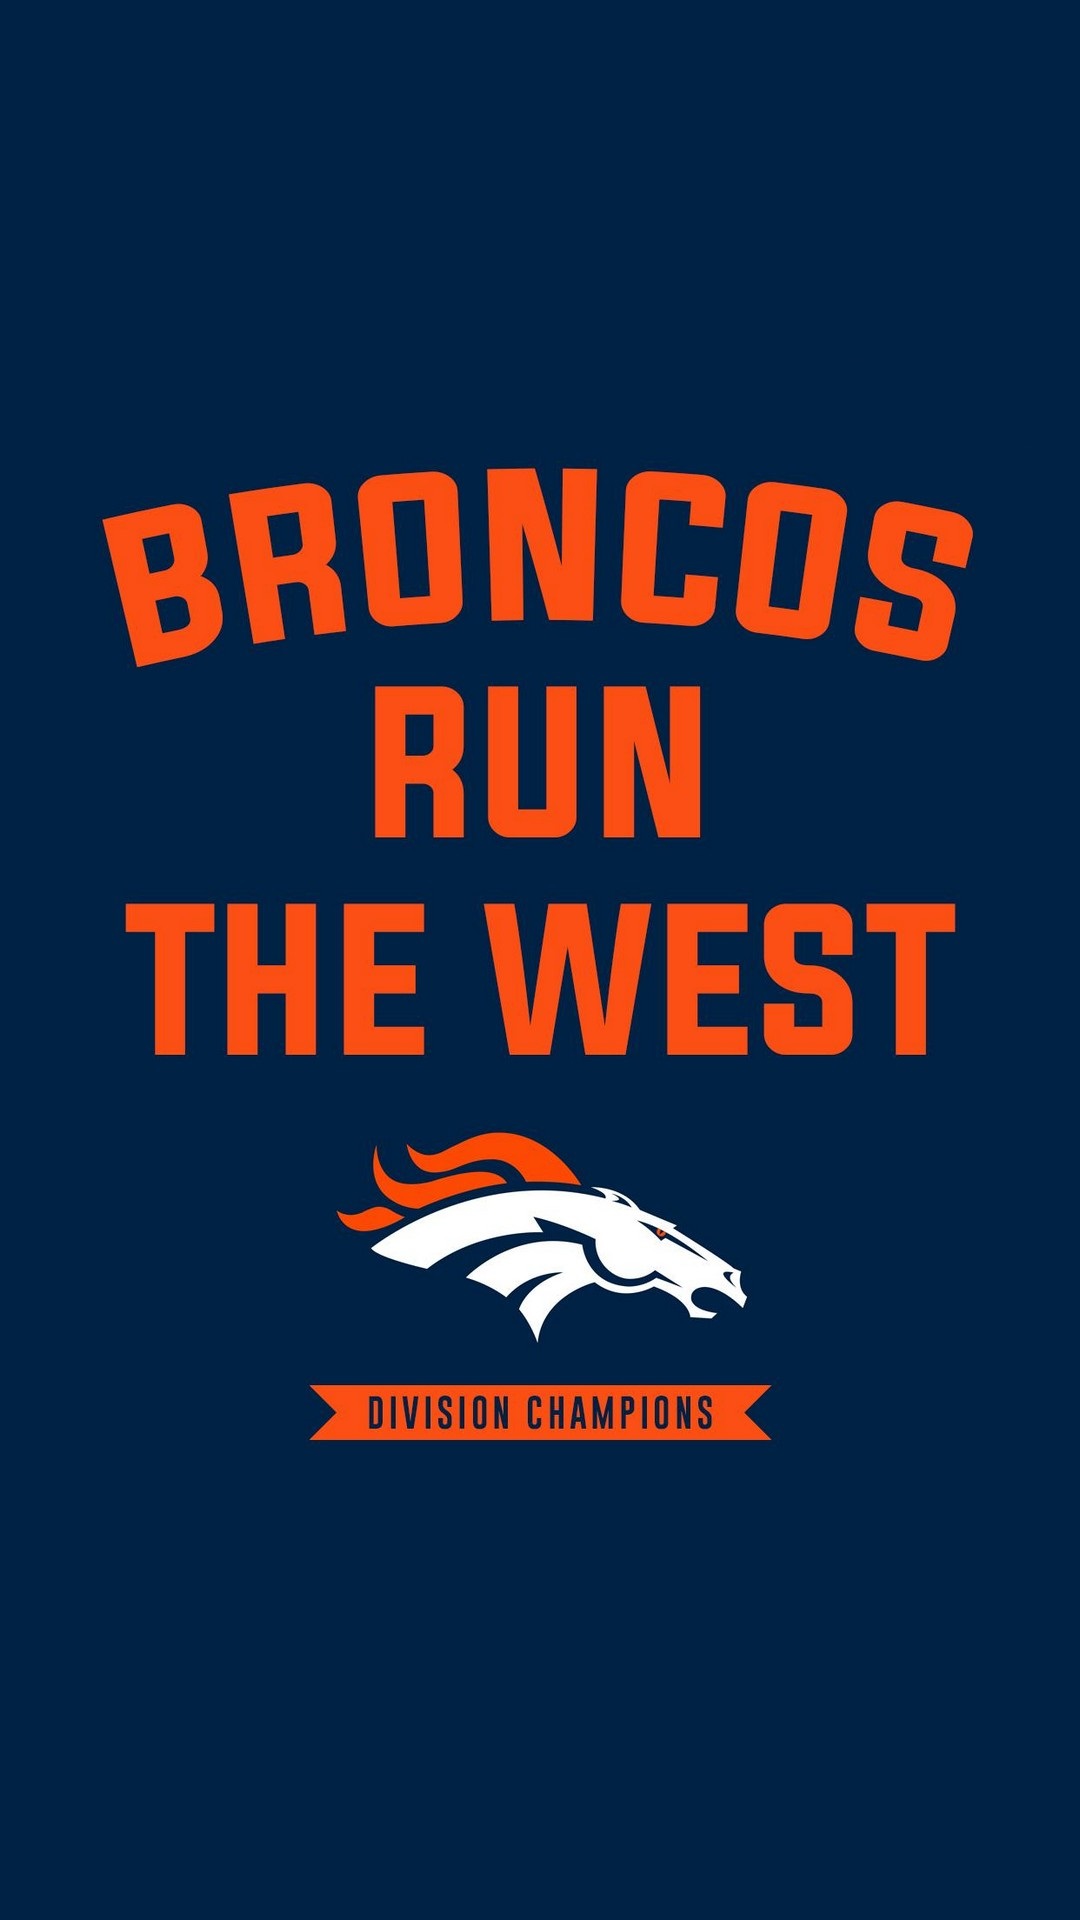 Denver Broncos iPhone 7 Plus Wallpaper with high-resolution 1080x1920 pixel. Download and set as wallpaper for Apple iPhone X, XS Max, XR, 8, 7, 6, SE, iPad, Android